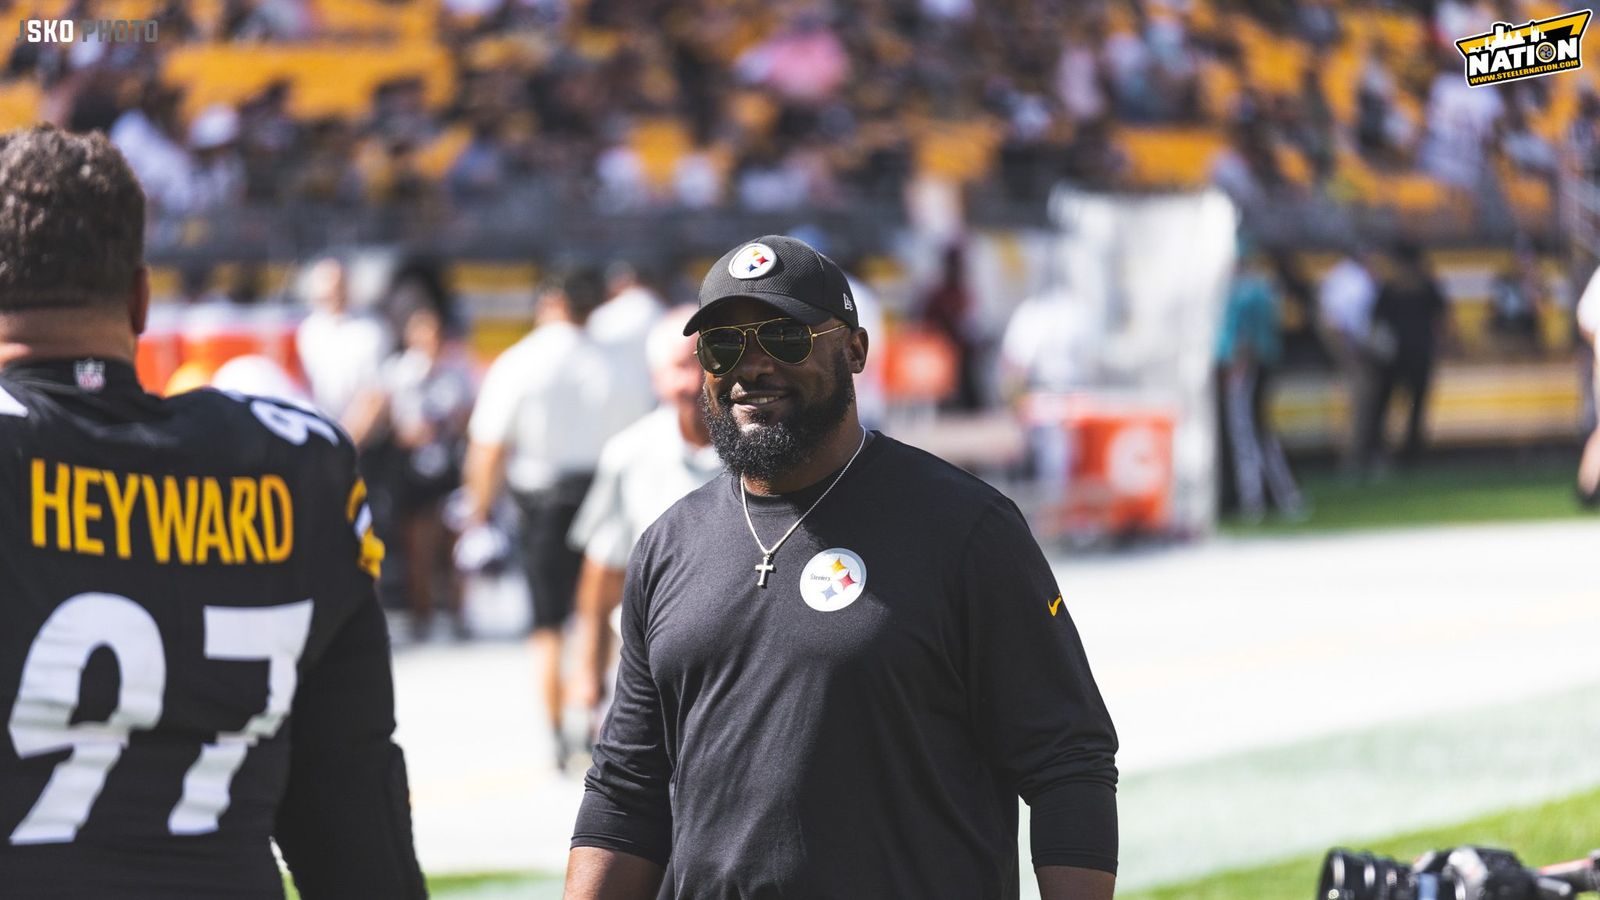 REPORT - Steelers Head Coach Mike Tomlin Was 'Very Very Close' To Leaving  Team For Television